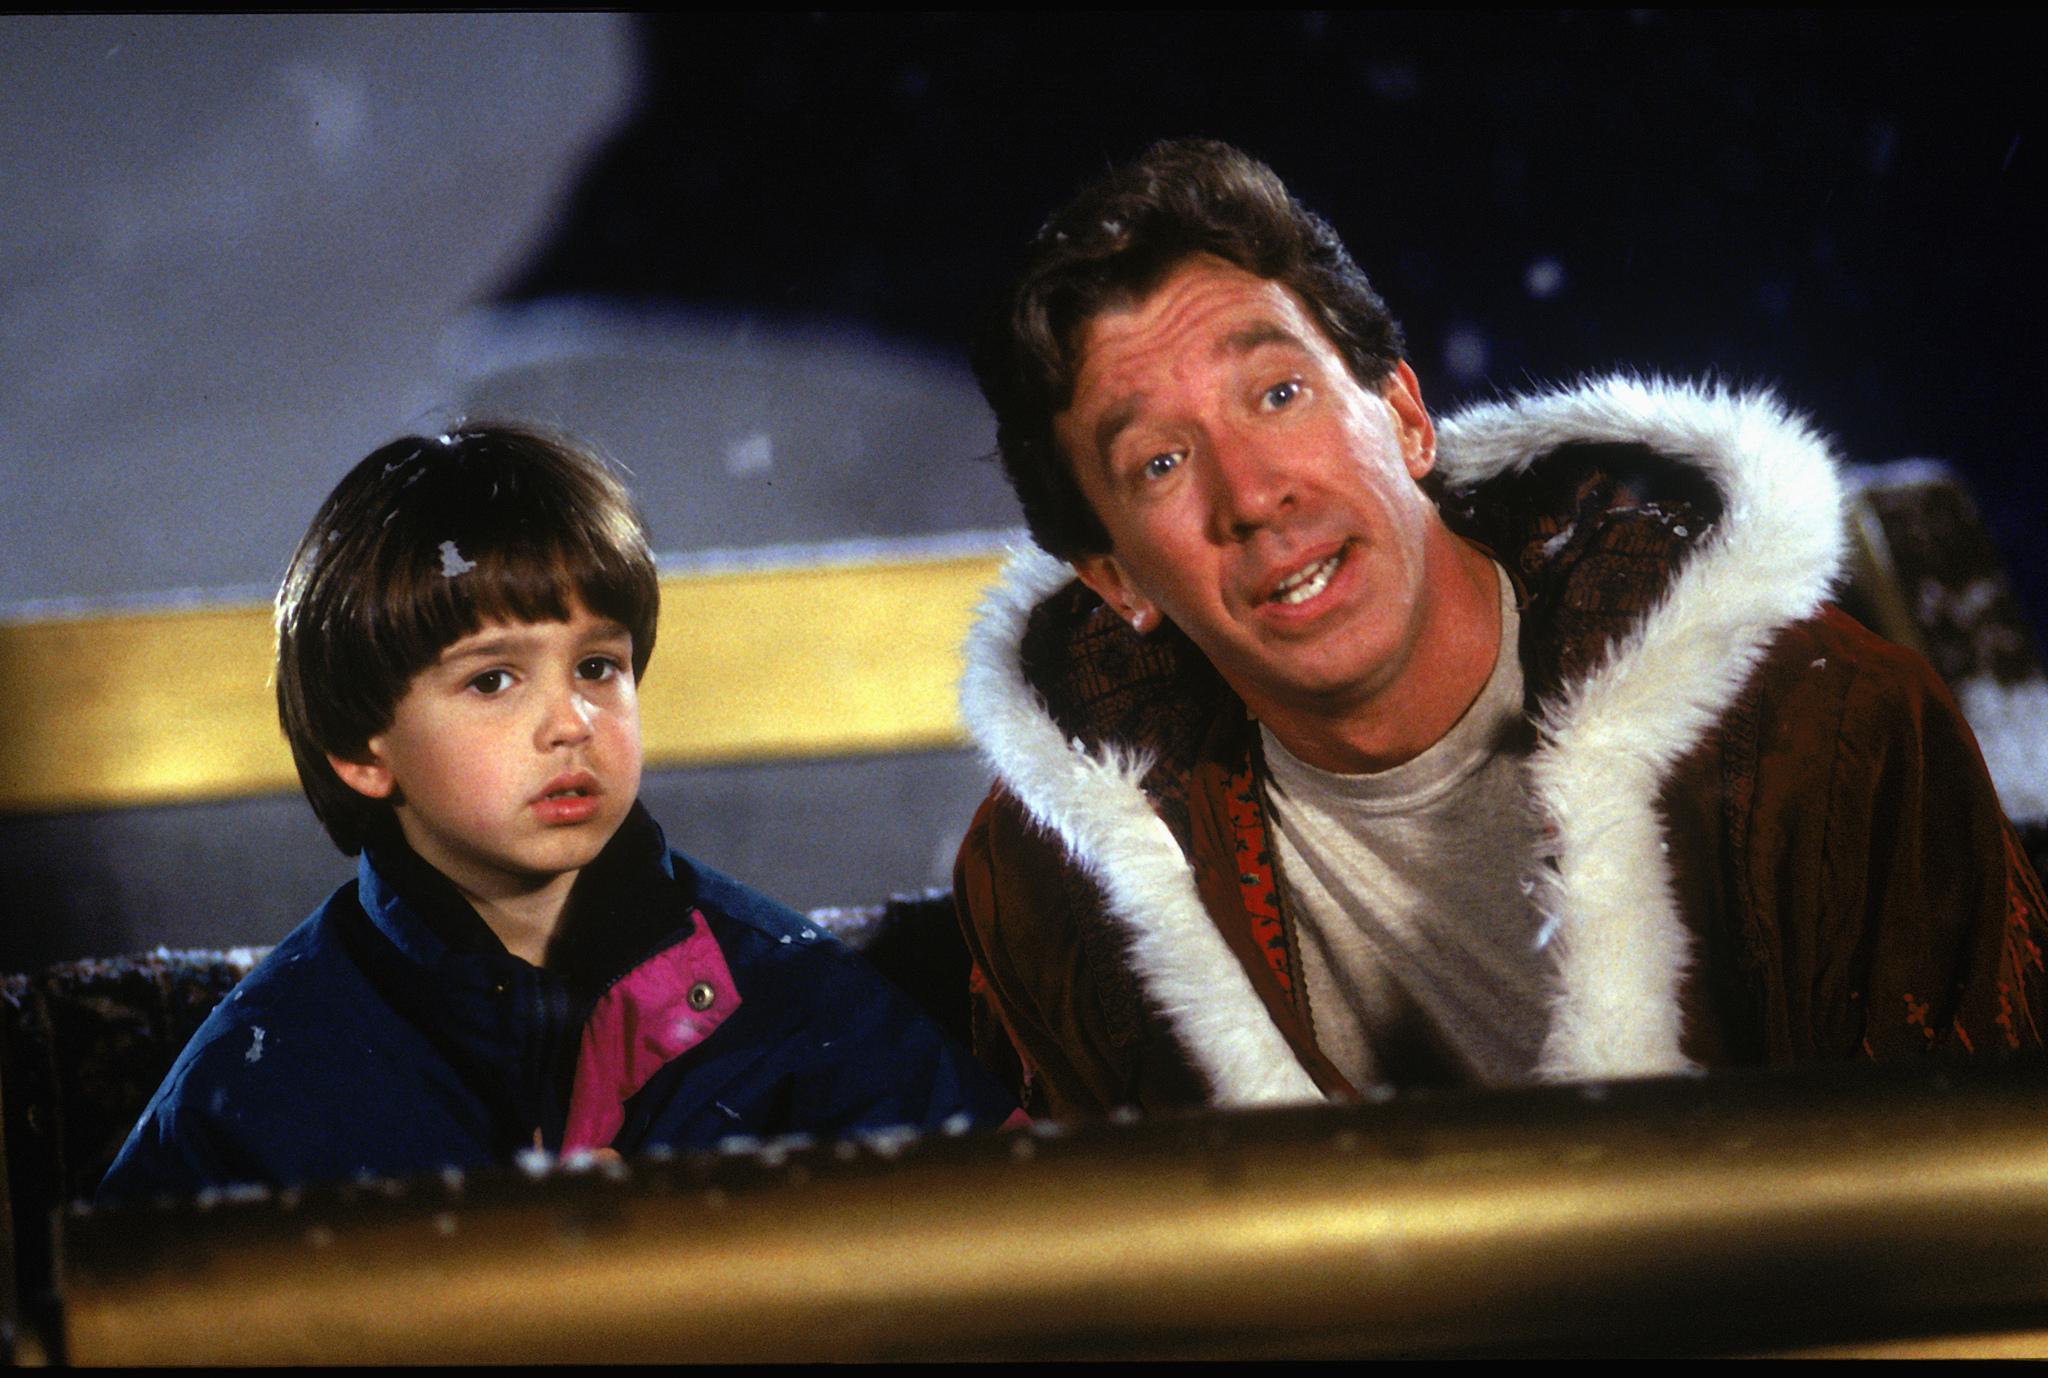 Picture Of Tim Allen And Eric Lloyd In The Santa Clause